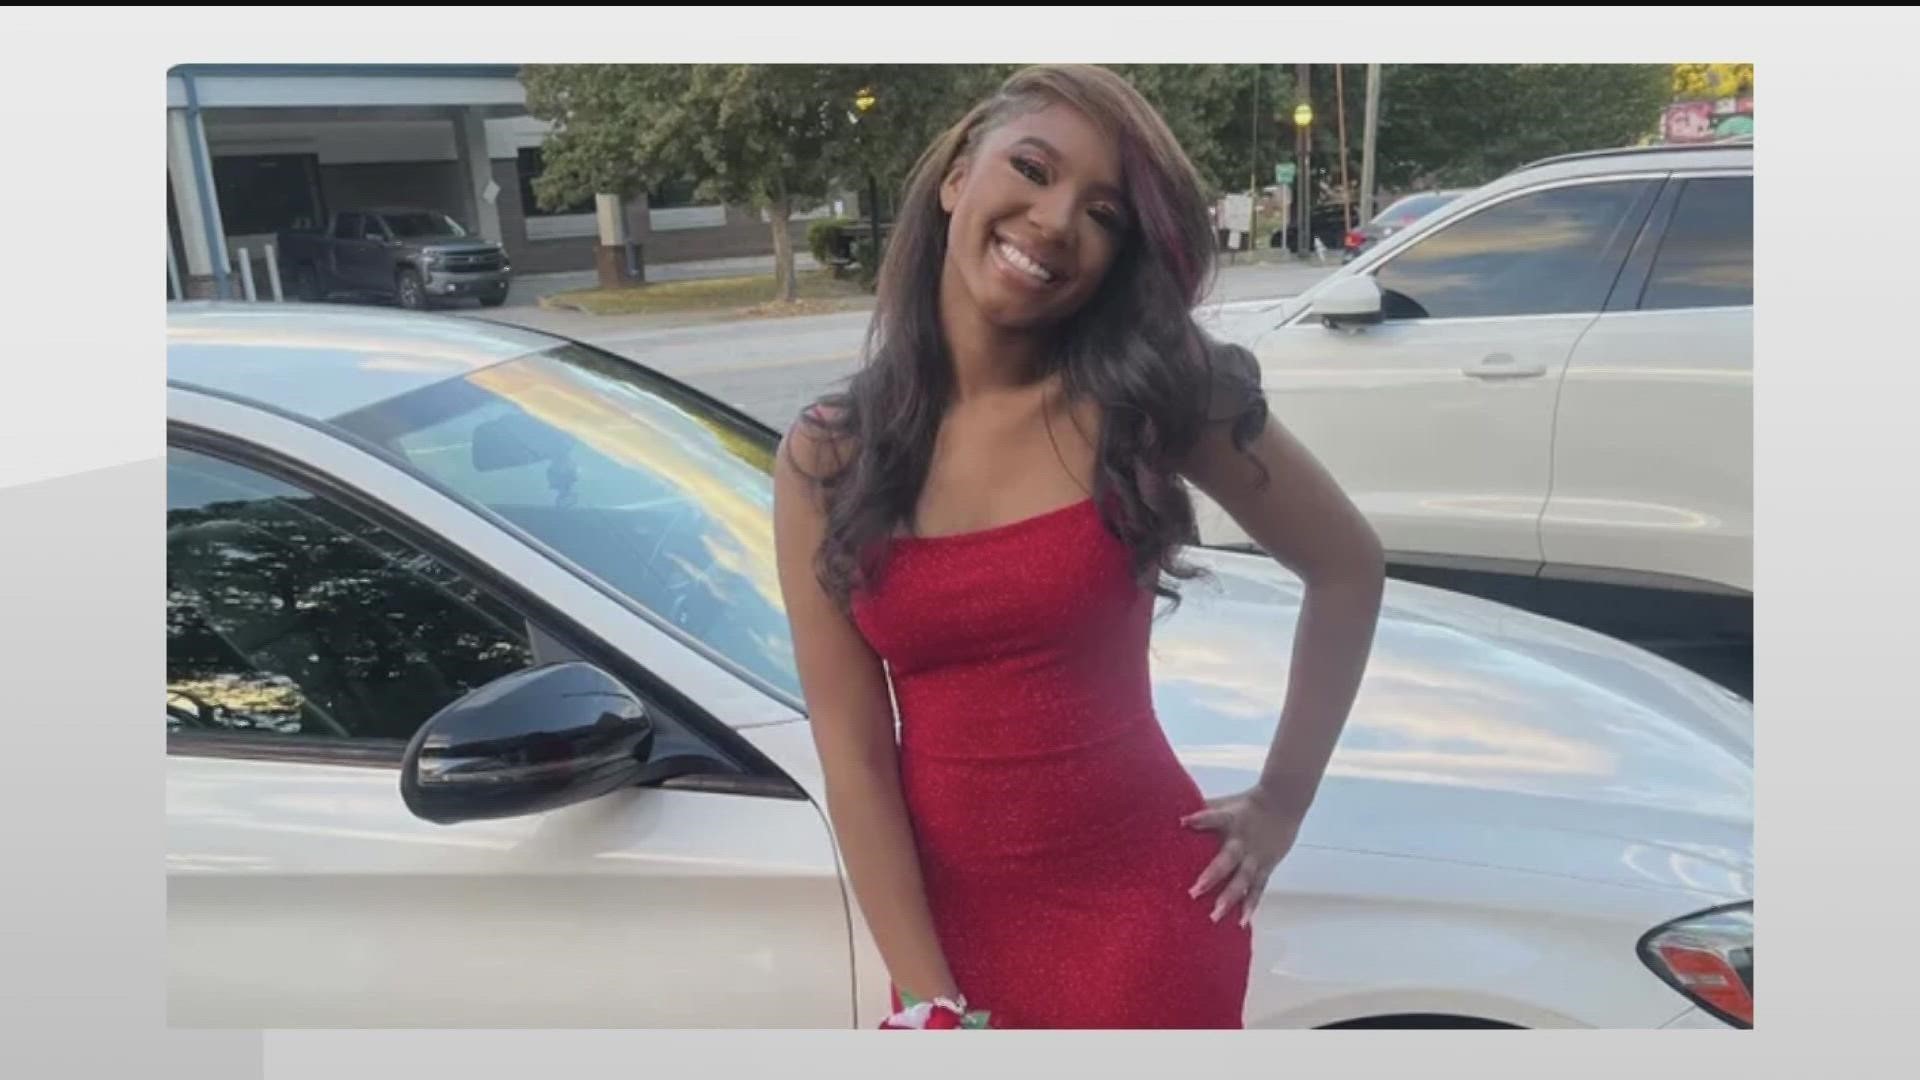 Police in Clayton County on Monday identified the victim in a shooting at a high school party on Saturday night as 15-year-old Laila Harris.